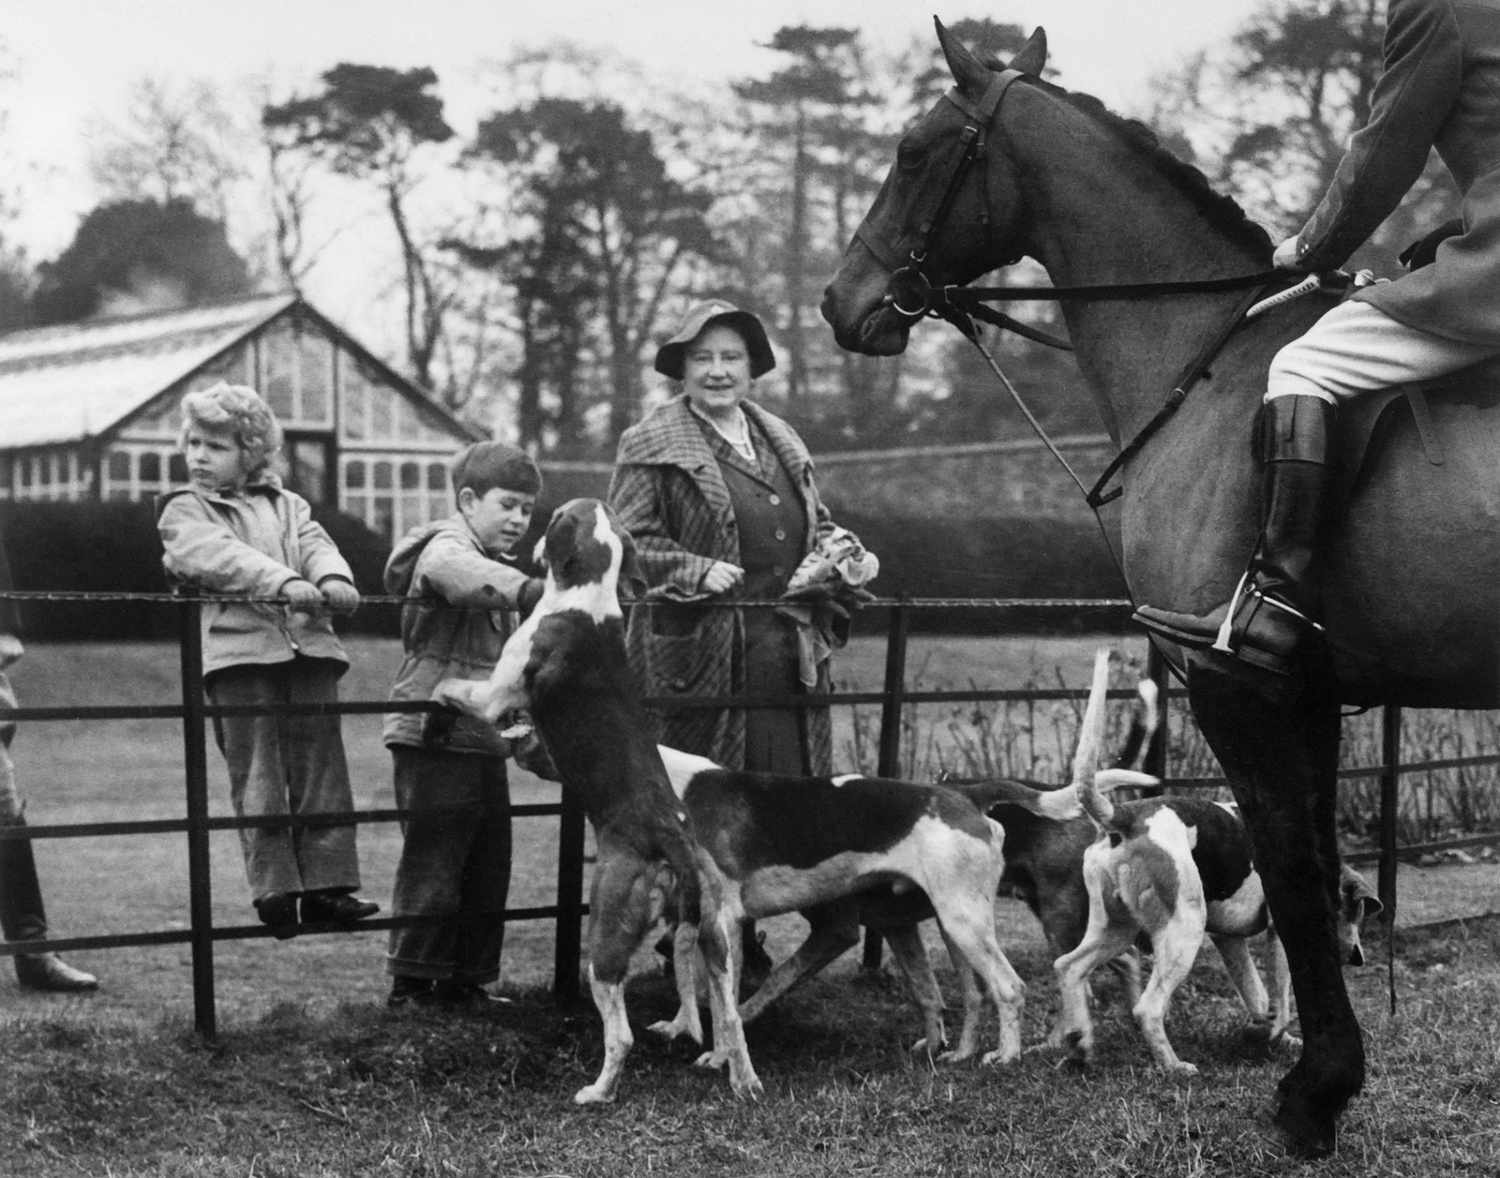 January 1956 in a royal residence in the Norfolk county showing Prince Charles and Princess Anne along with the Queen mother greeting the hunting dogs